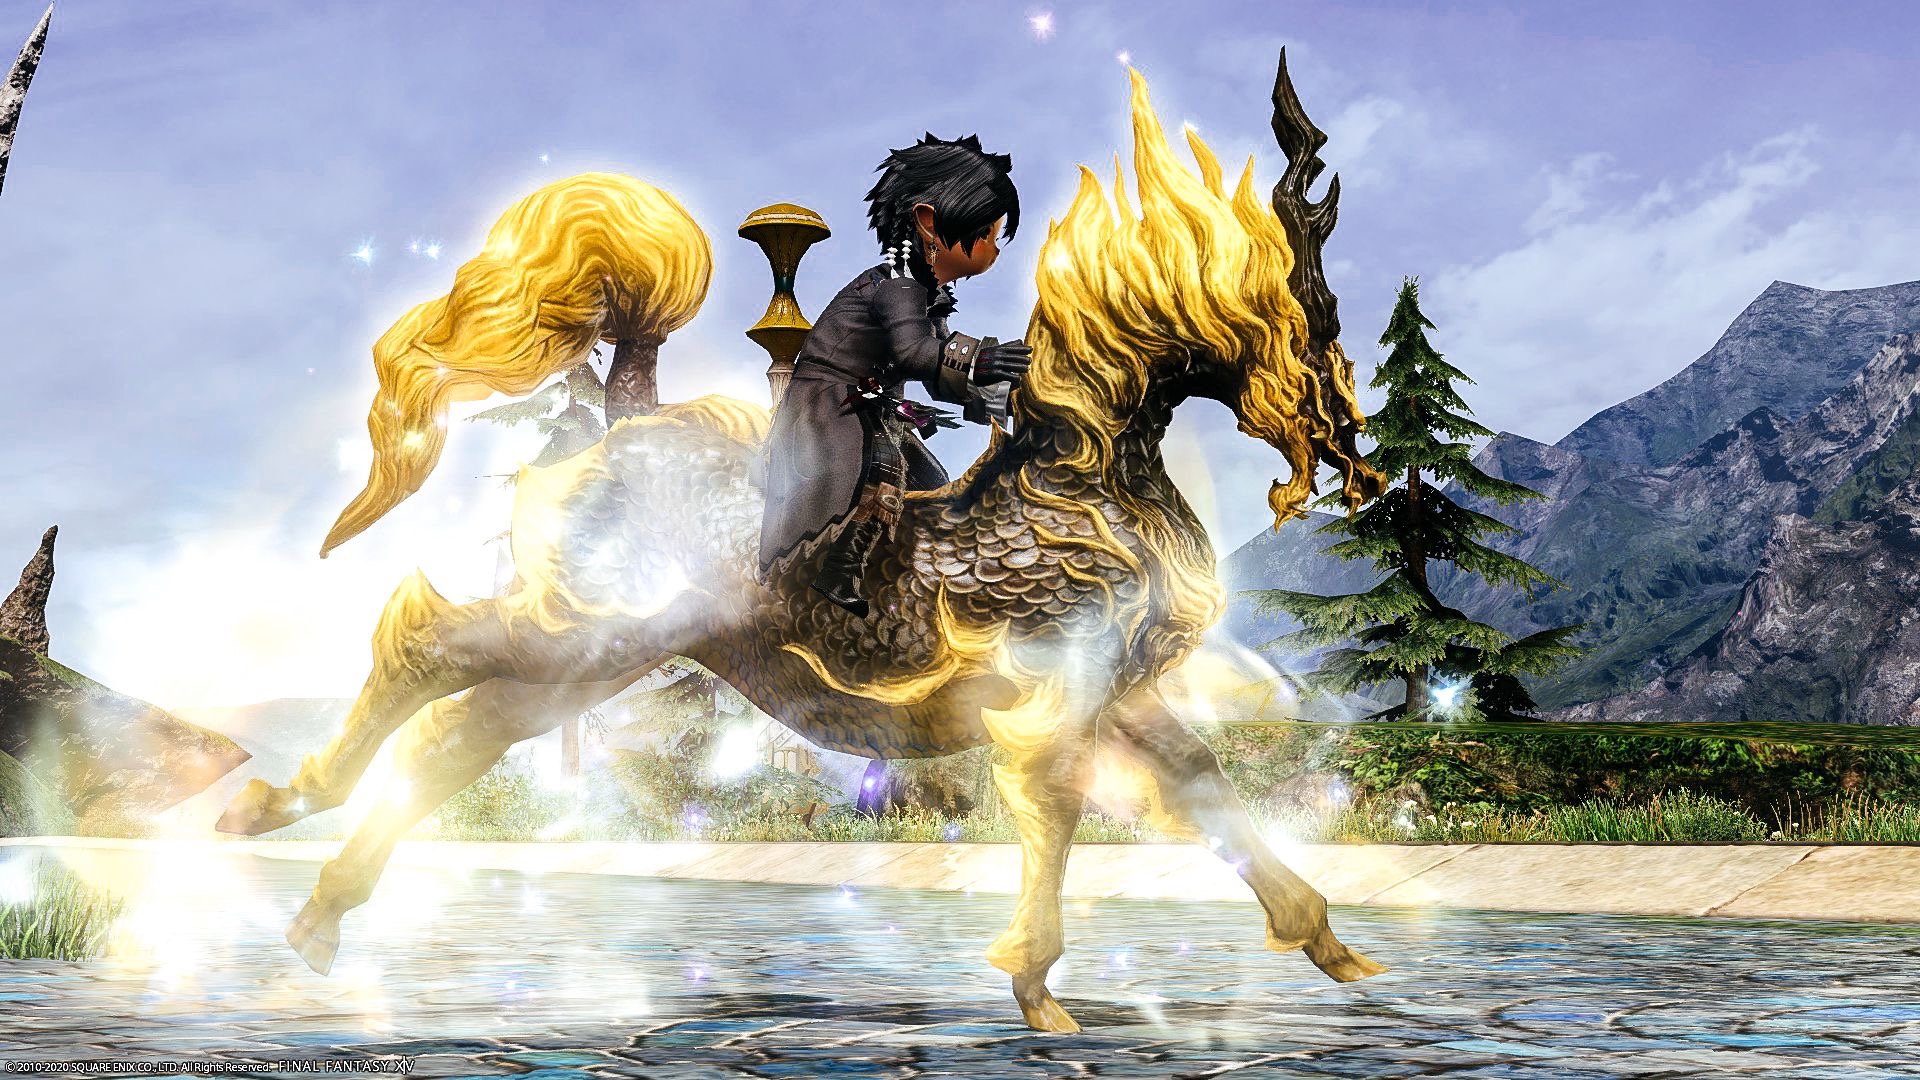 "Kirin" is a mount that you can get after completing "A Real...